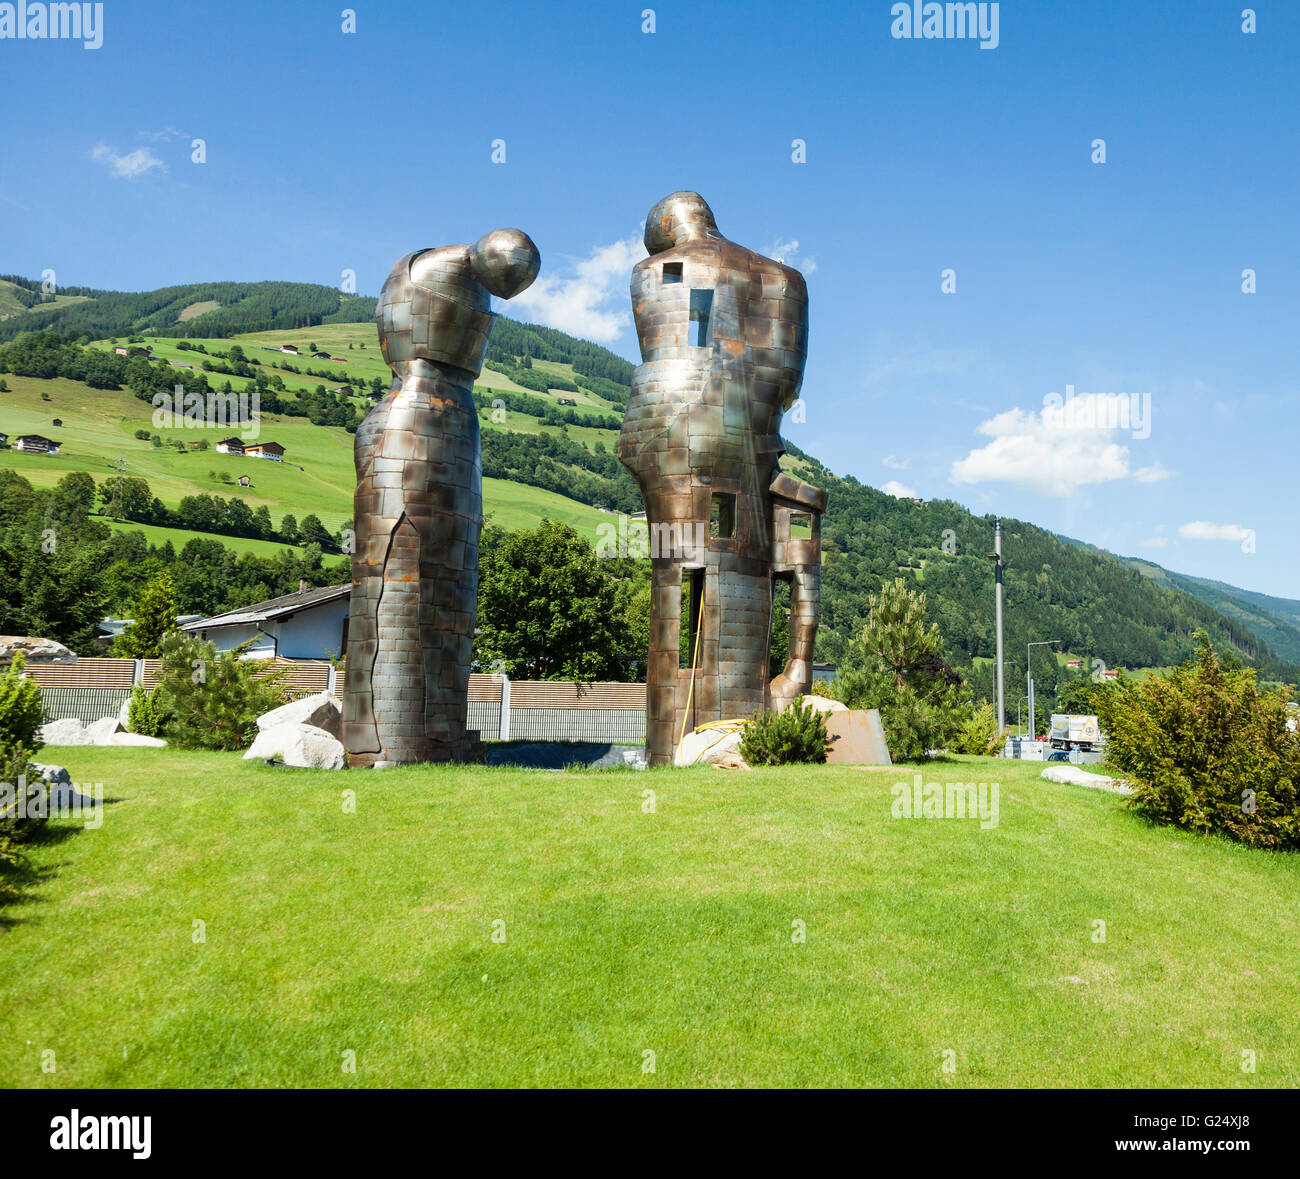 herrn-von-felben or The Men from Felben metal sculpture or statues on the roundabout  at Mittersill Austria Europe Stock Photo